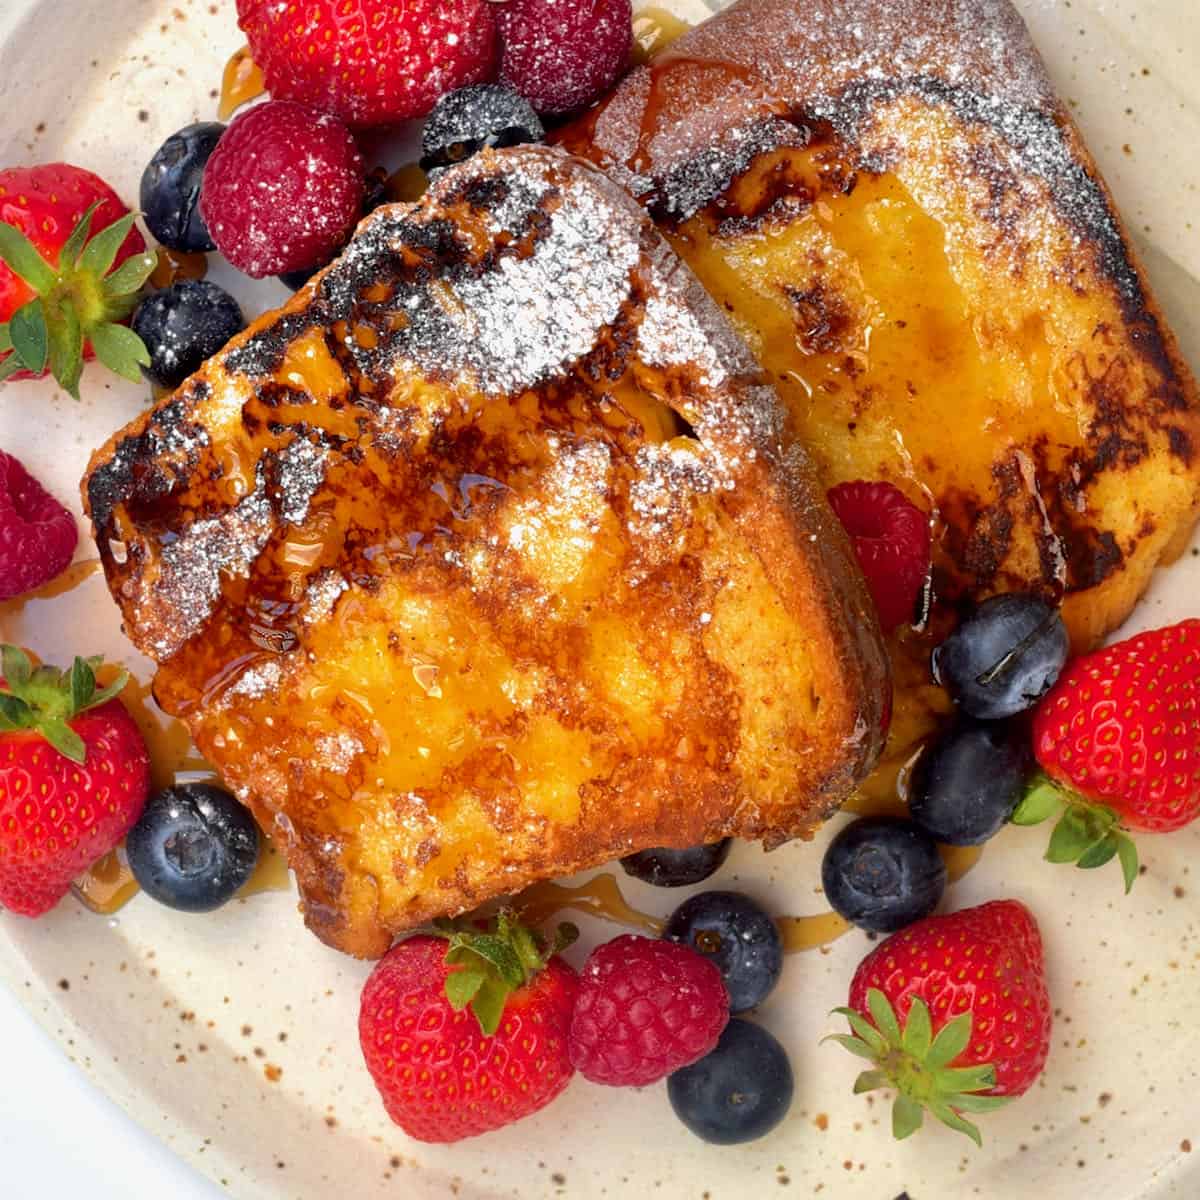 https://www.alphafoodie.com/wp-content/uploads/2021/06/French-Toast-1-of-1.jpeg